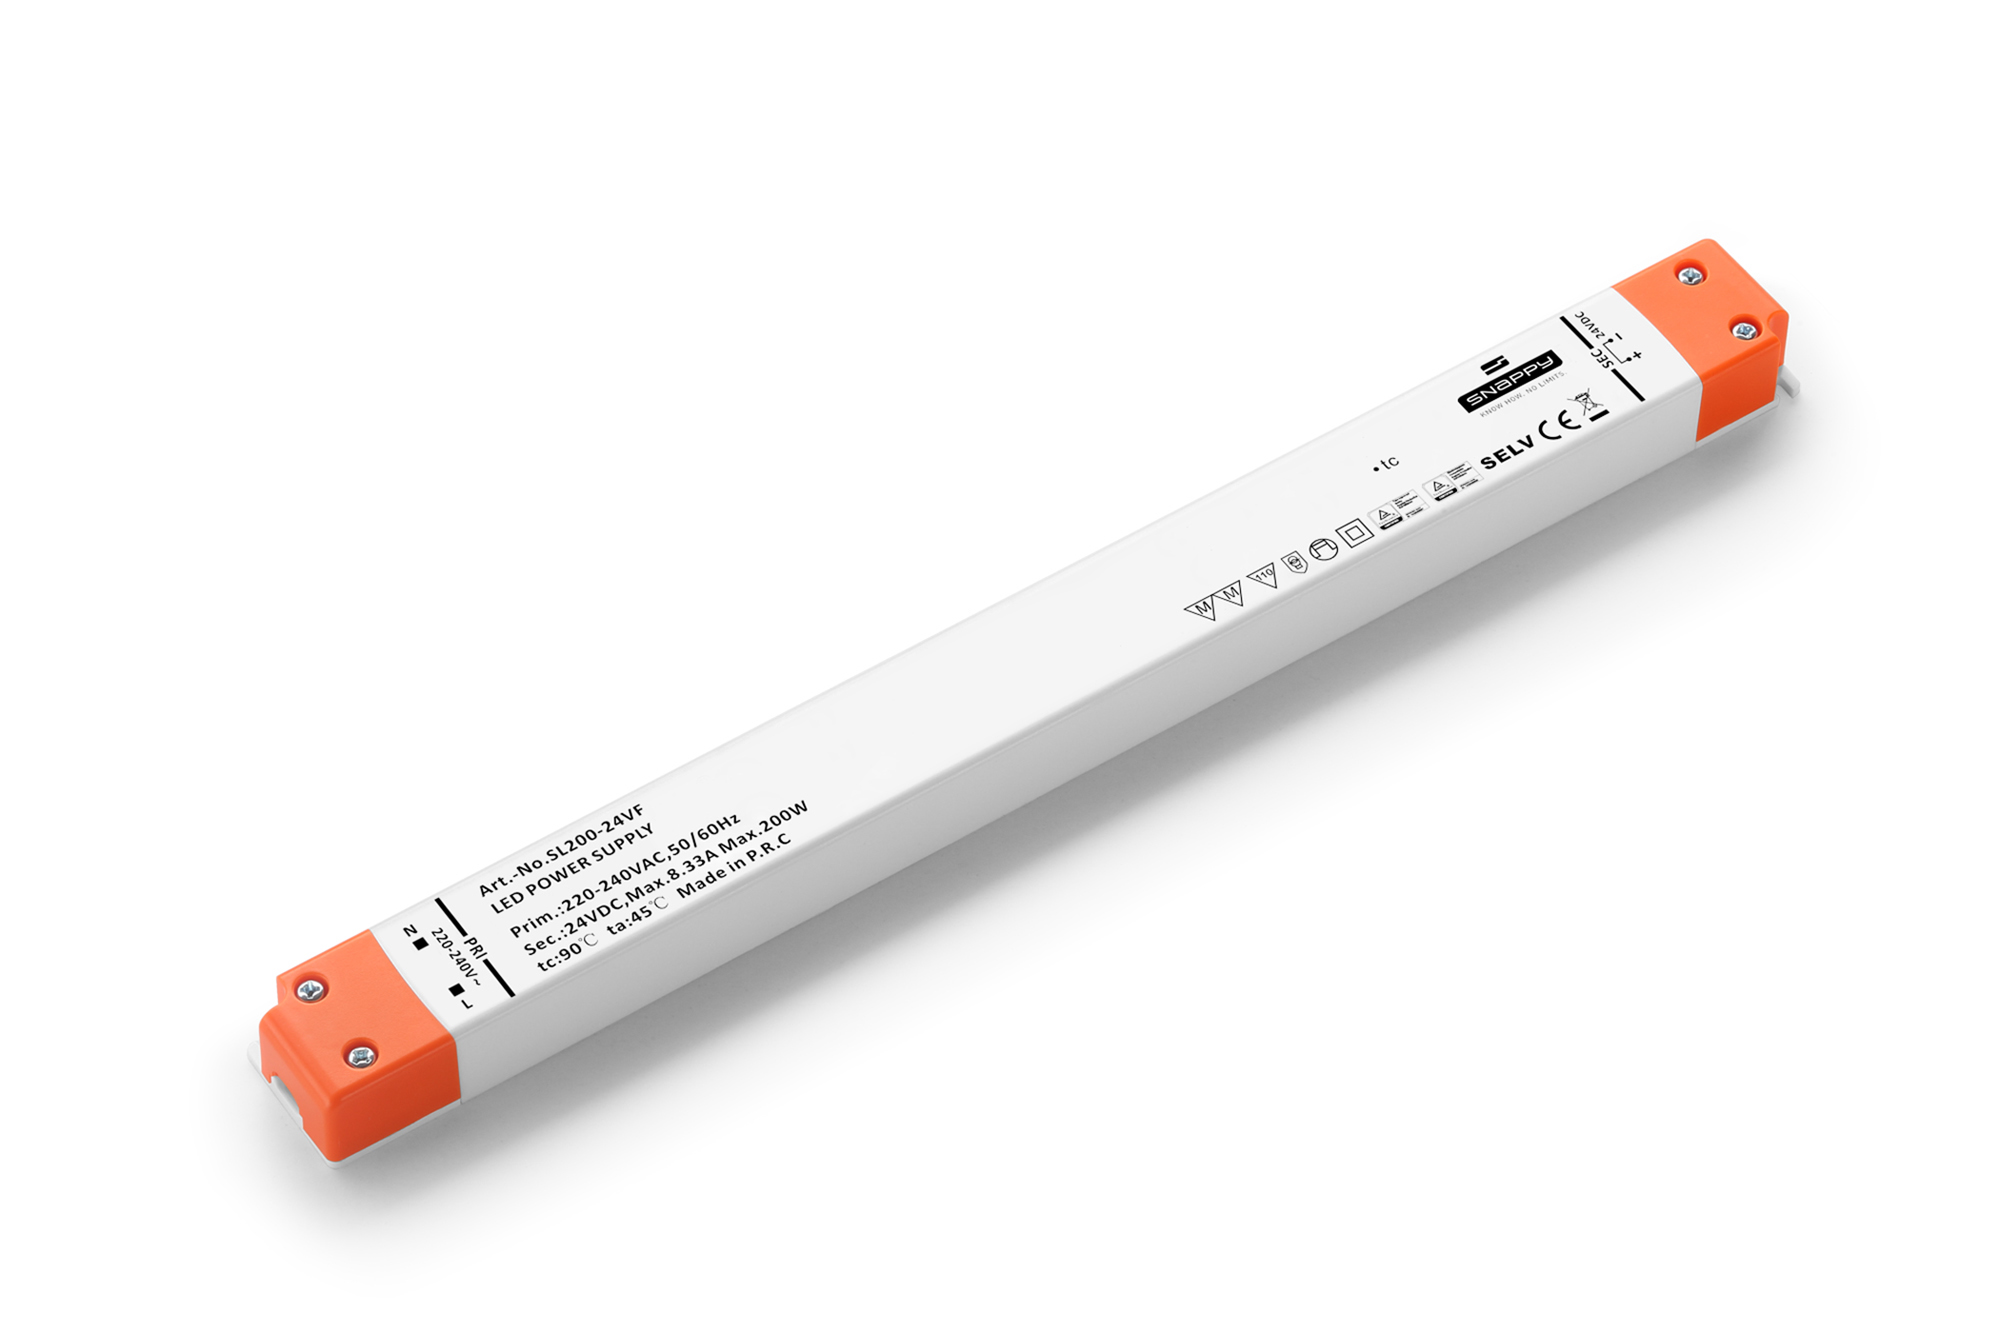 SL200-24VF  200W, Constant Voltage Non Dimmable LED Driver, 24VDC, 8.33A, Input 200-240VAC 50/60Hz, IP20.